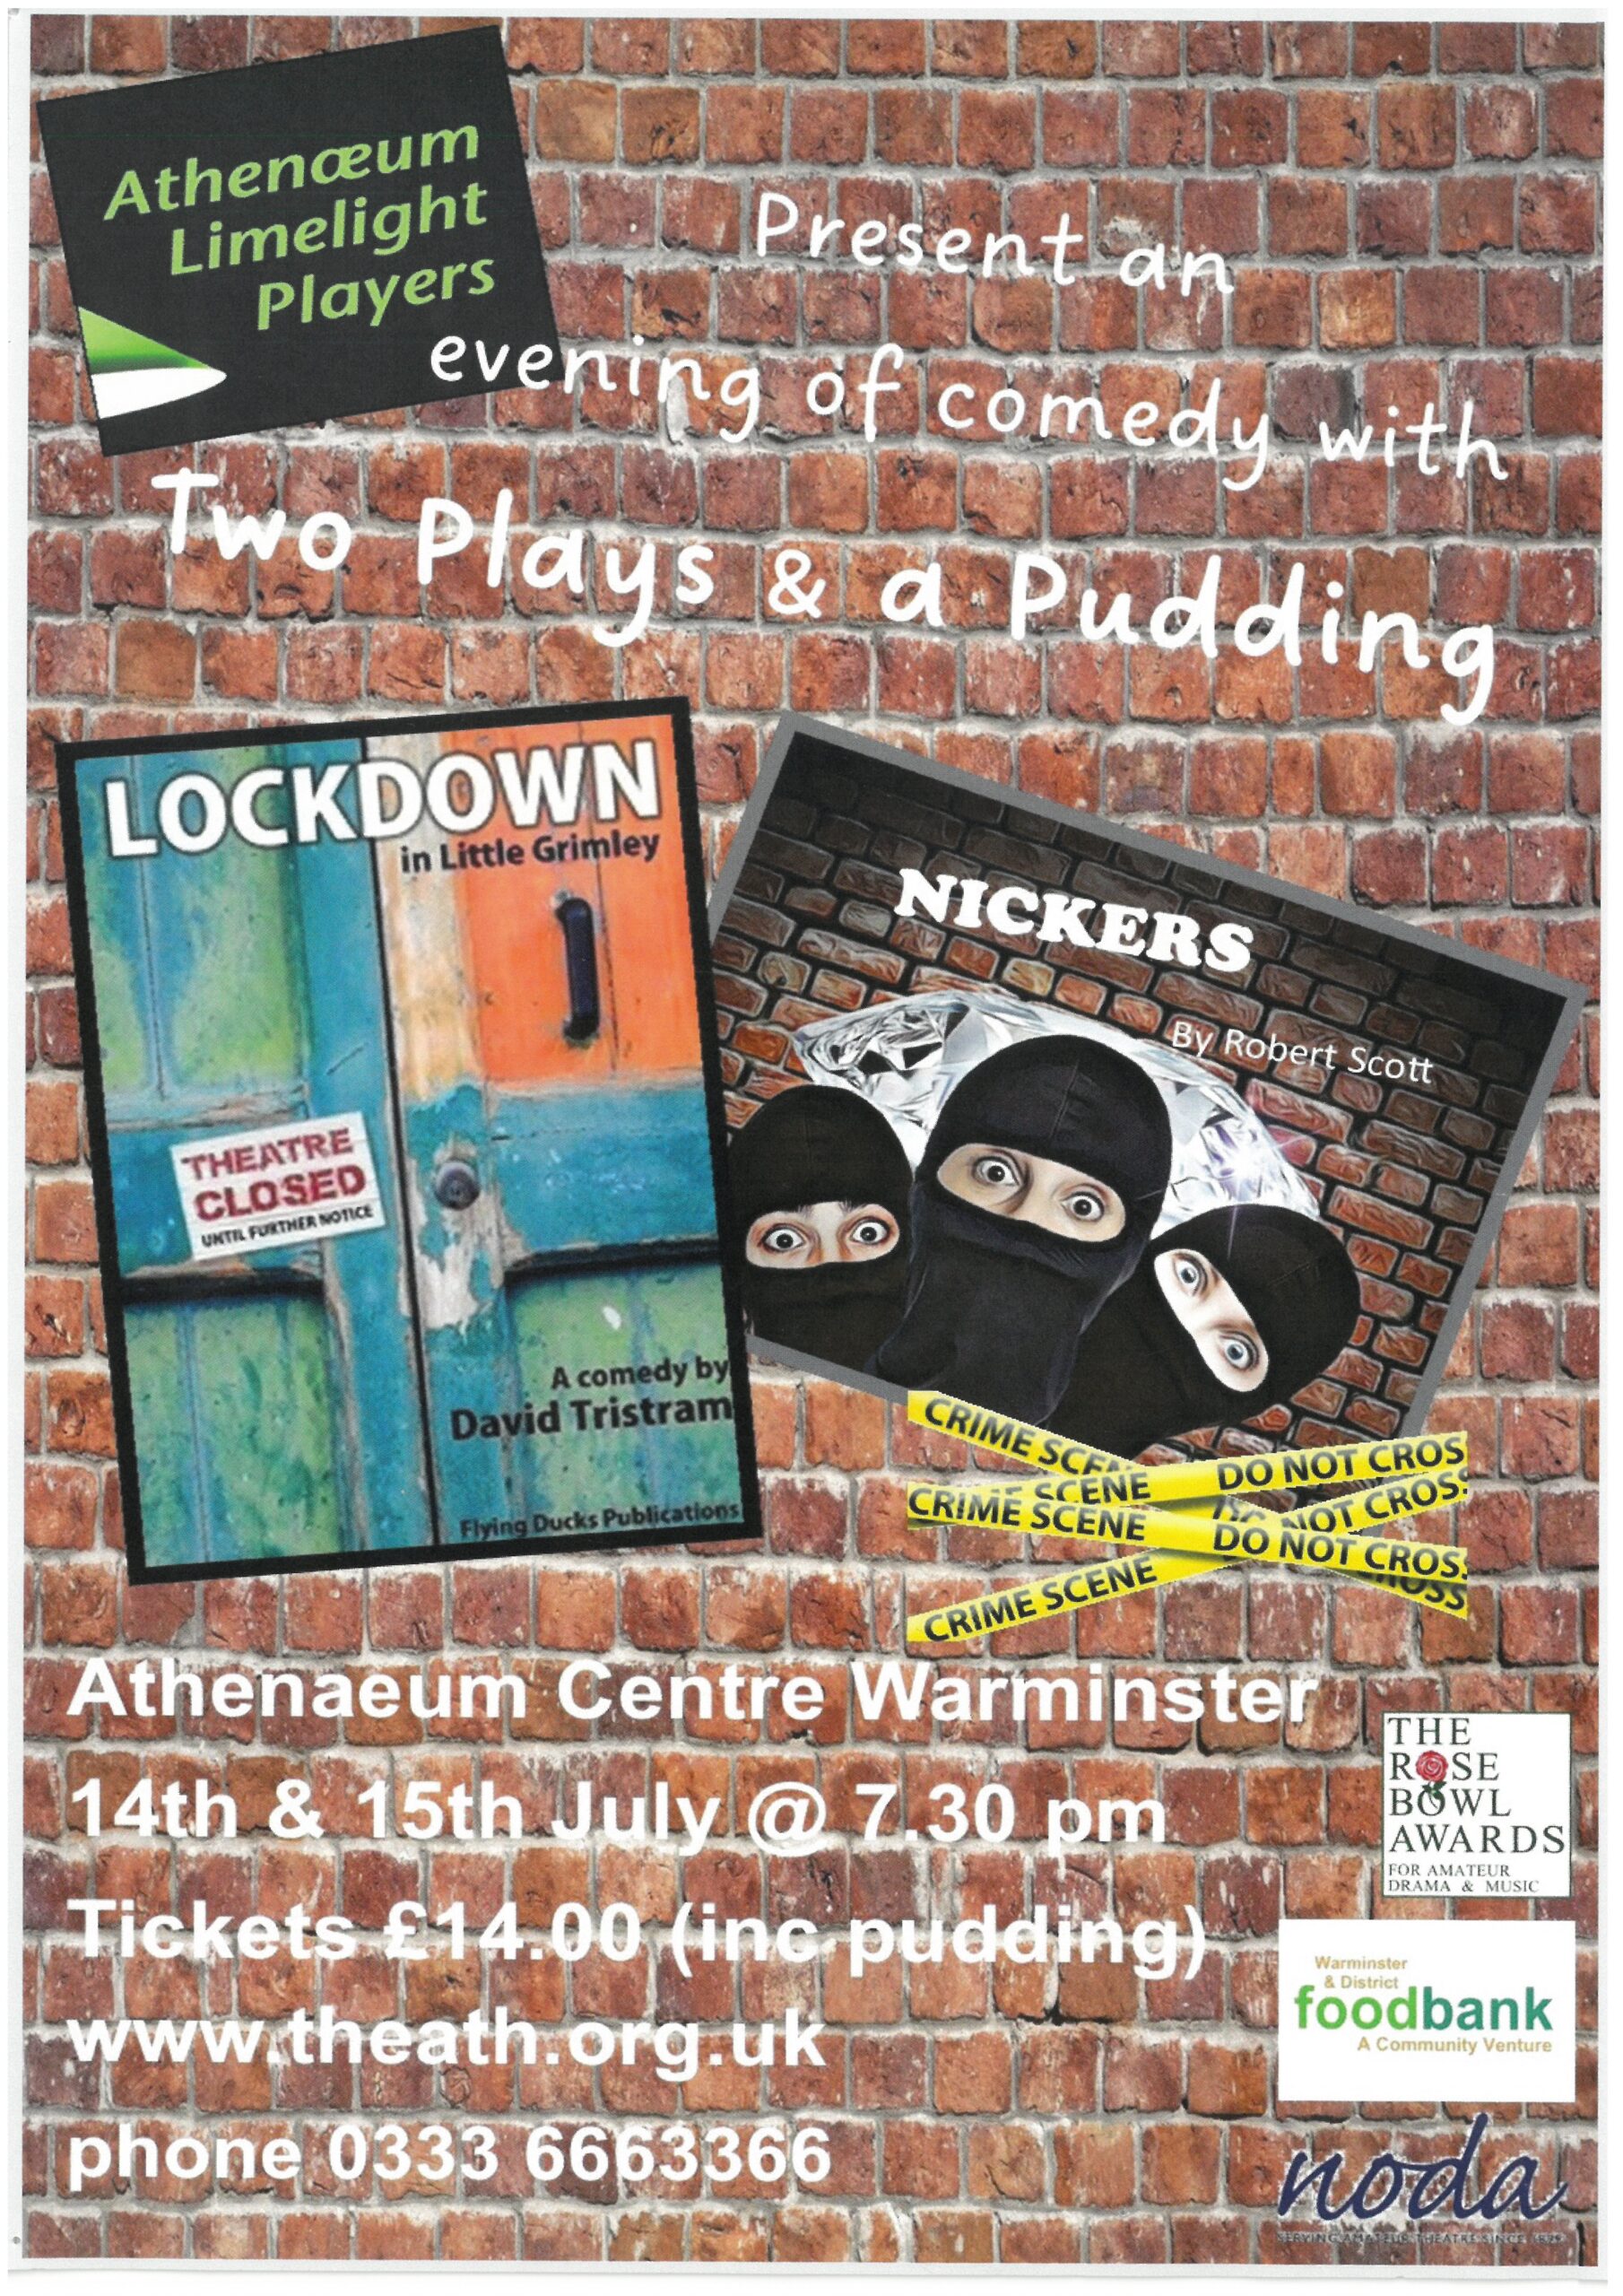 An Evening of Comedy with Two Plays and a Pudding